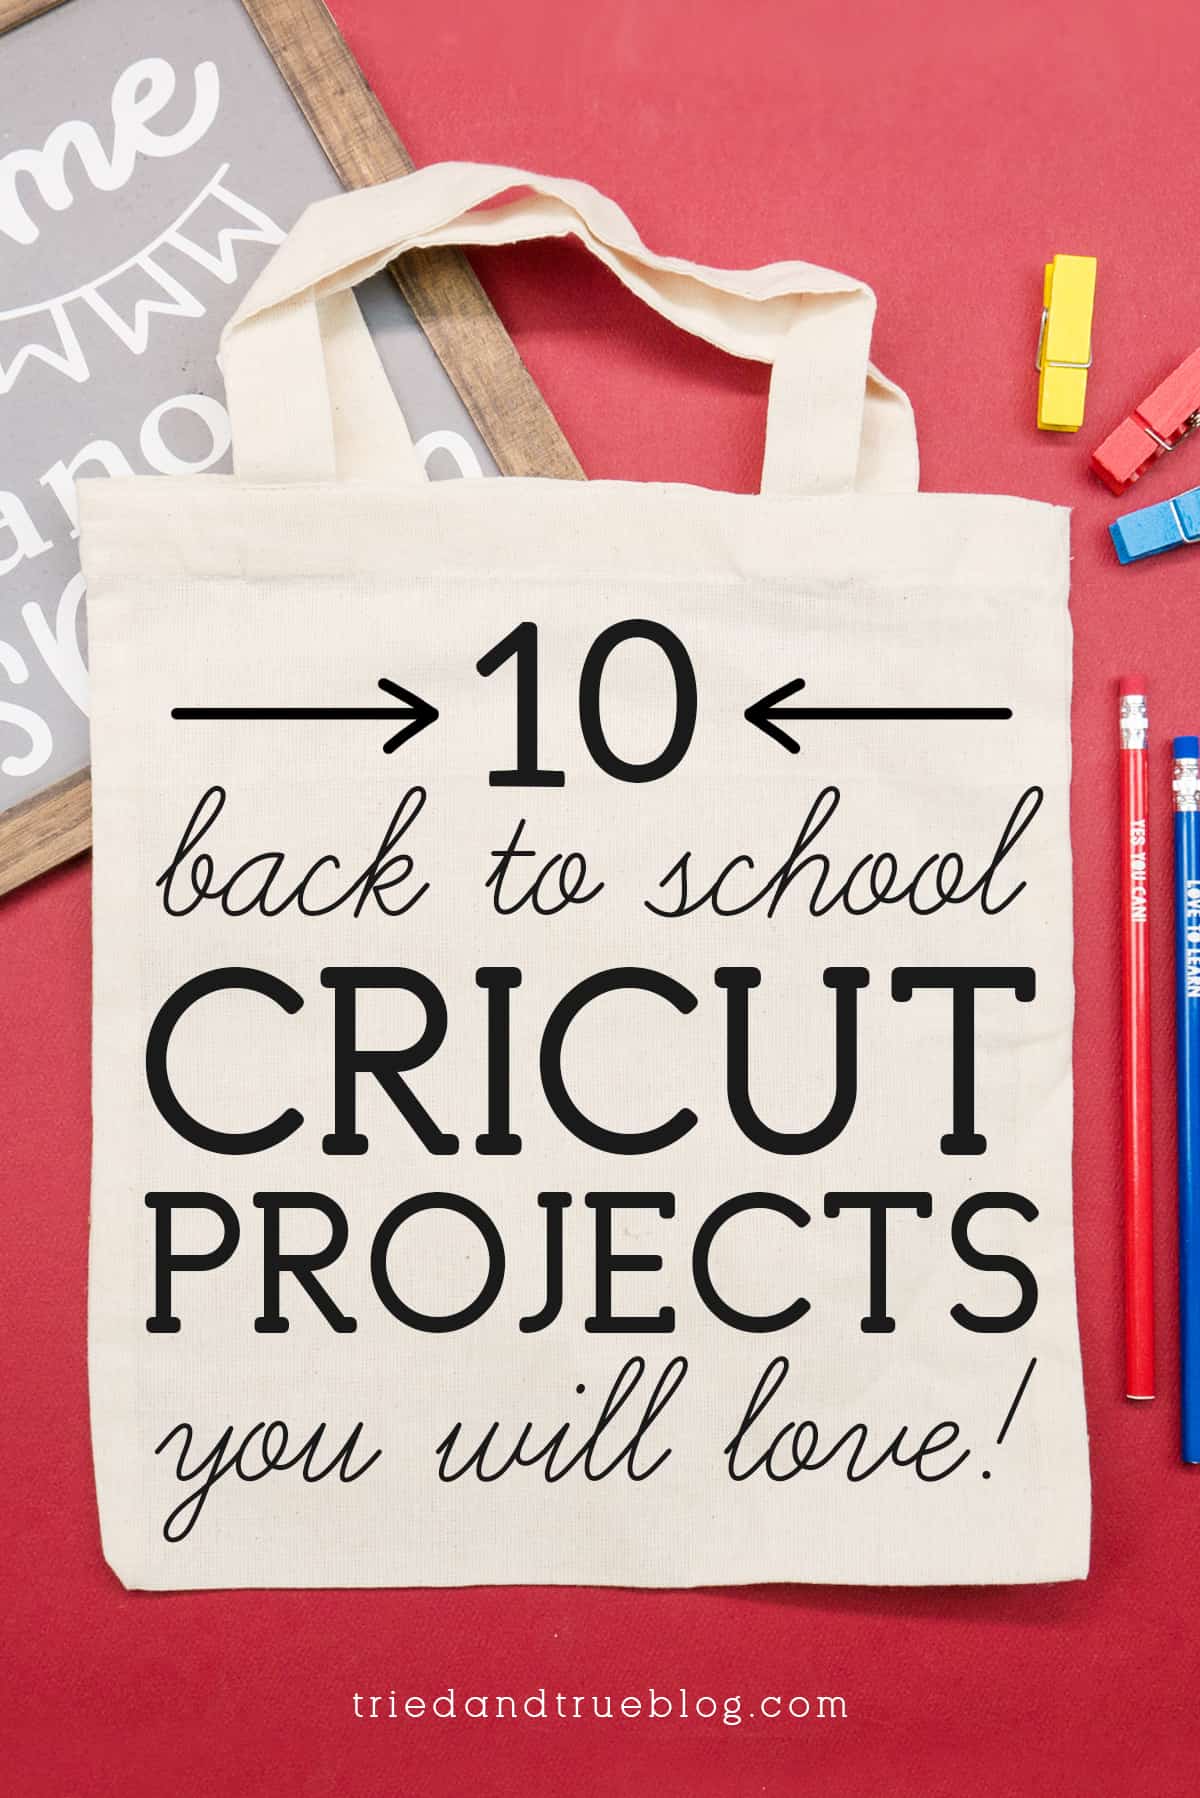 Blank canvas bag with the words "10 Back to School Cricut Projects you will love!"